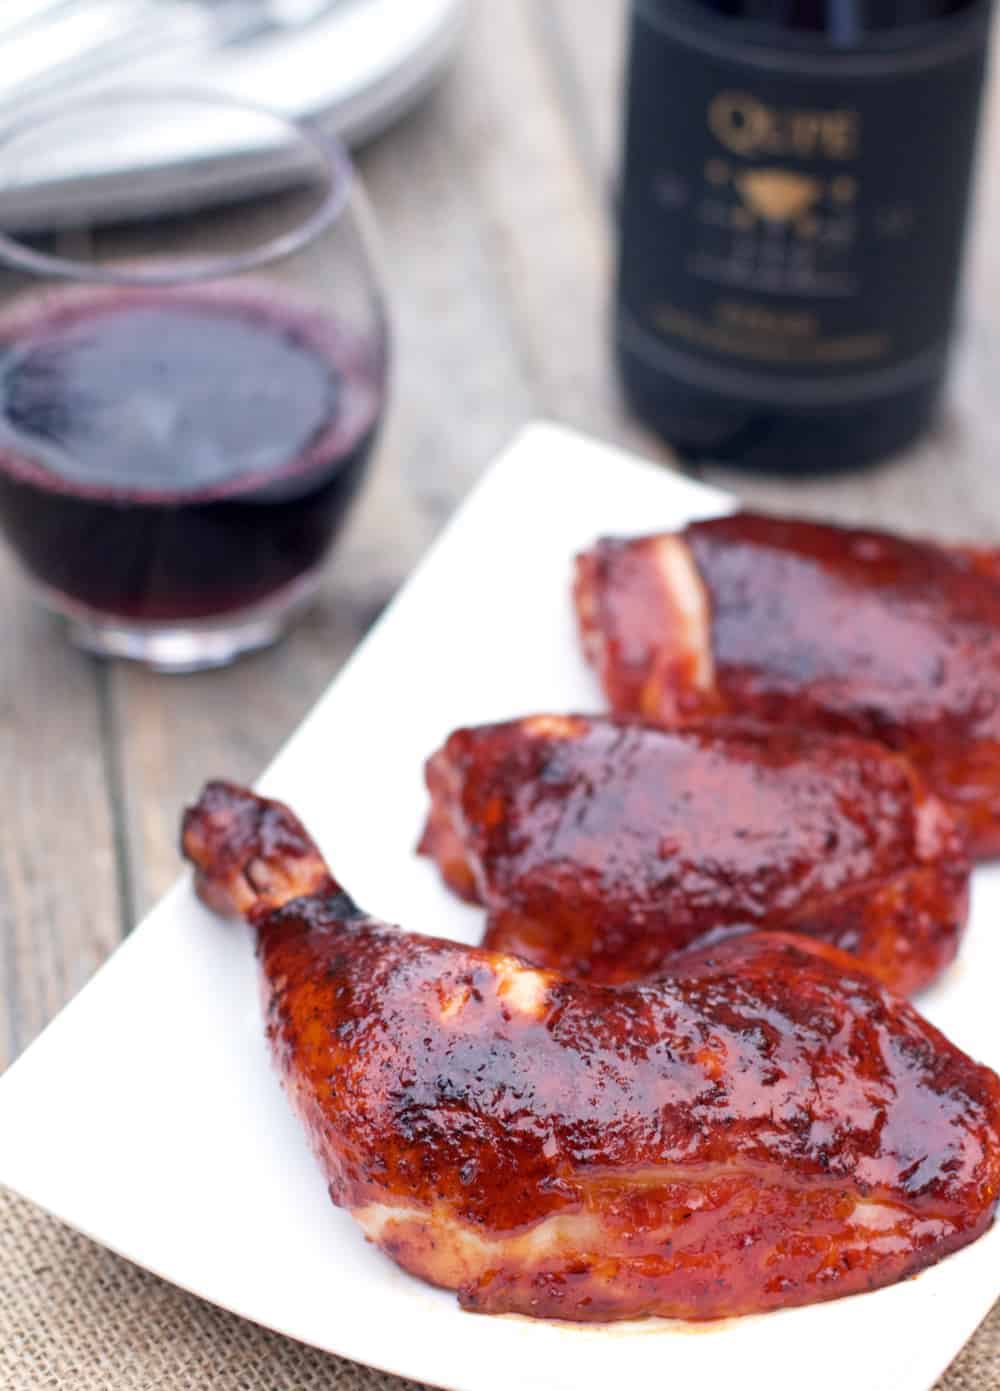 Glazed BBQ Chicken paired with a glass of wine